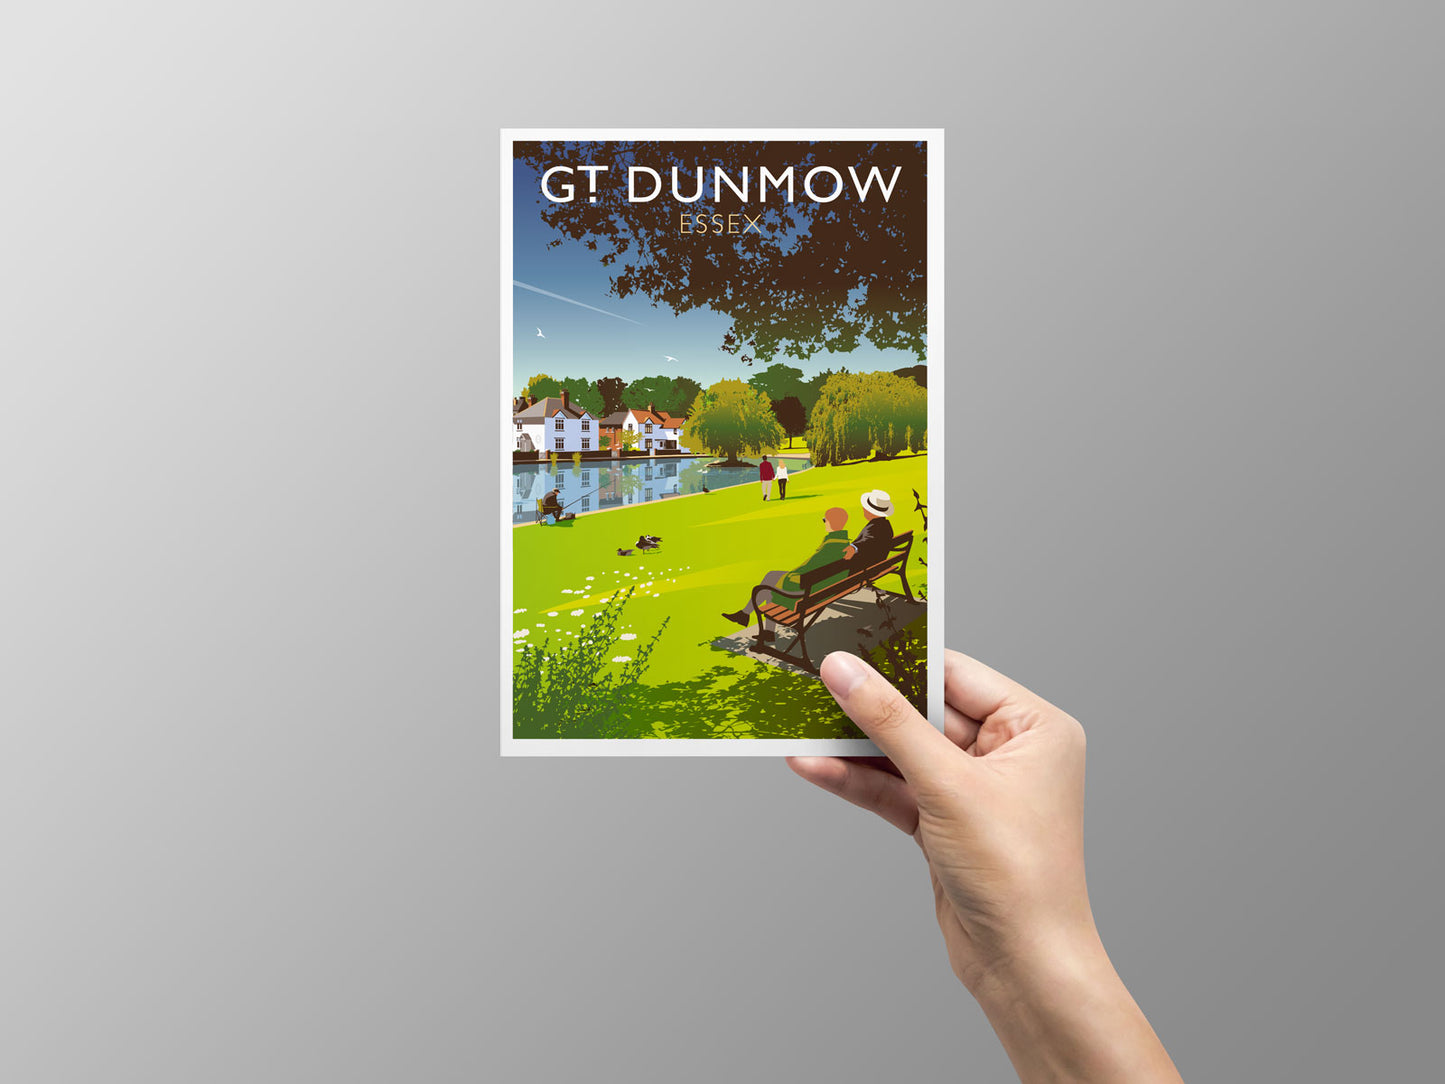 Gt Dunmow, Uttlesford Greeting Card